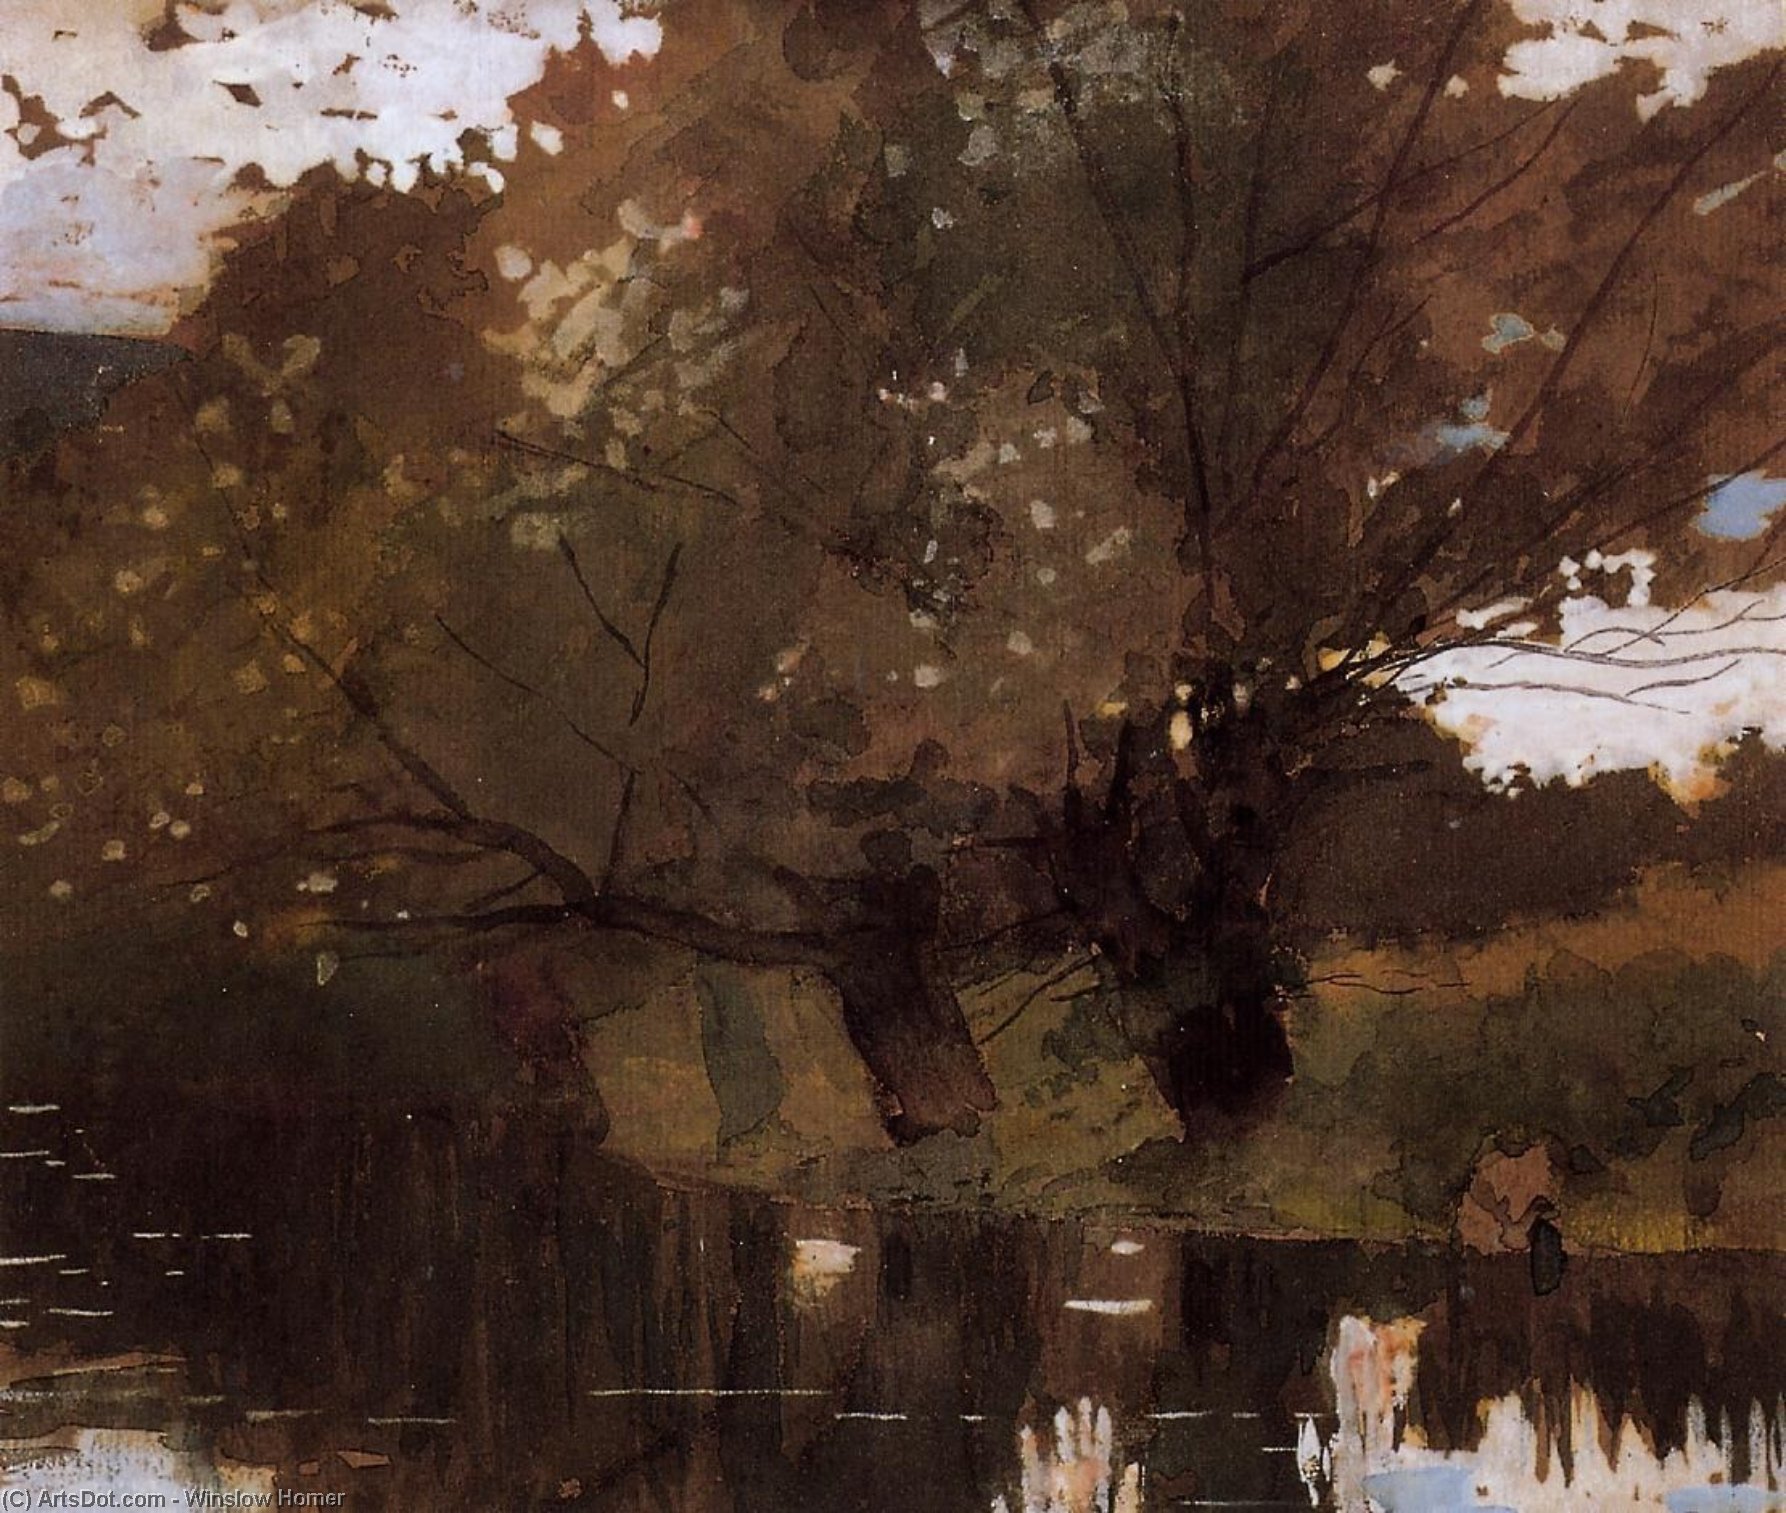 Order Paintings Reproductions Pond and Willows, Houghton Farm, 1878 by Winslow Homer (1836-1910, United States) | ArtsDot.com